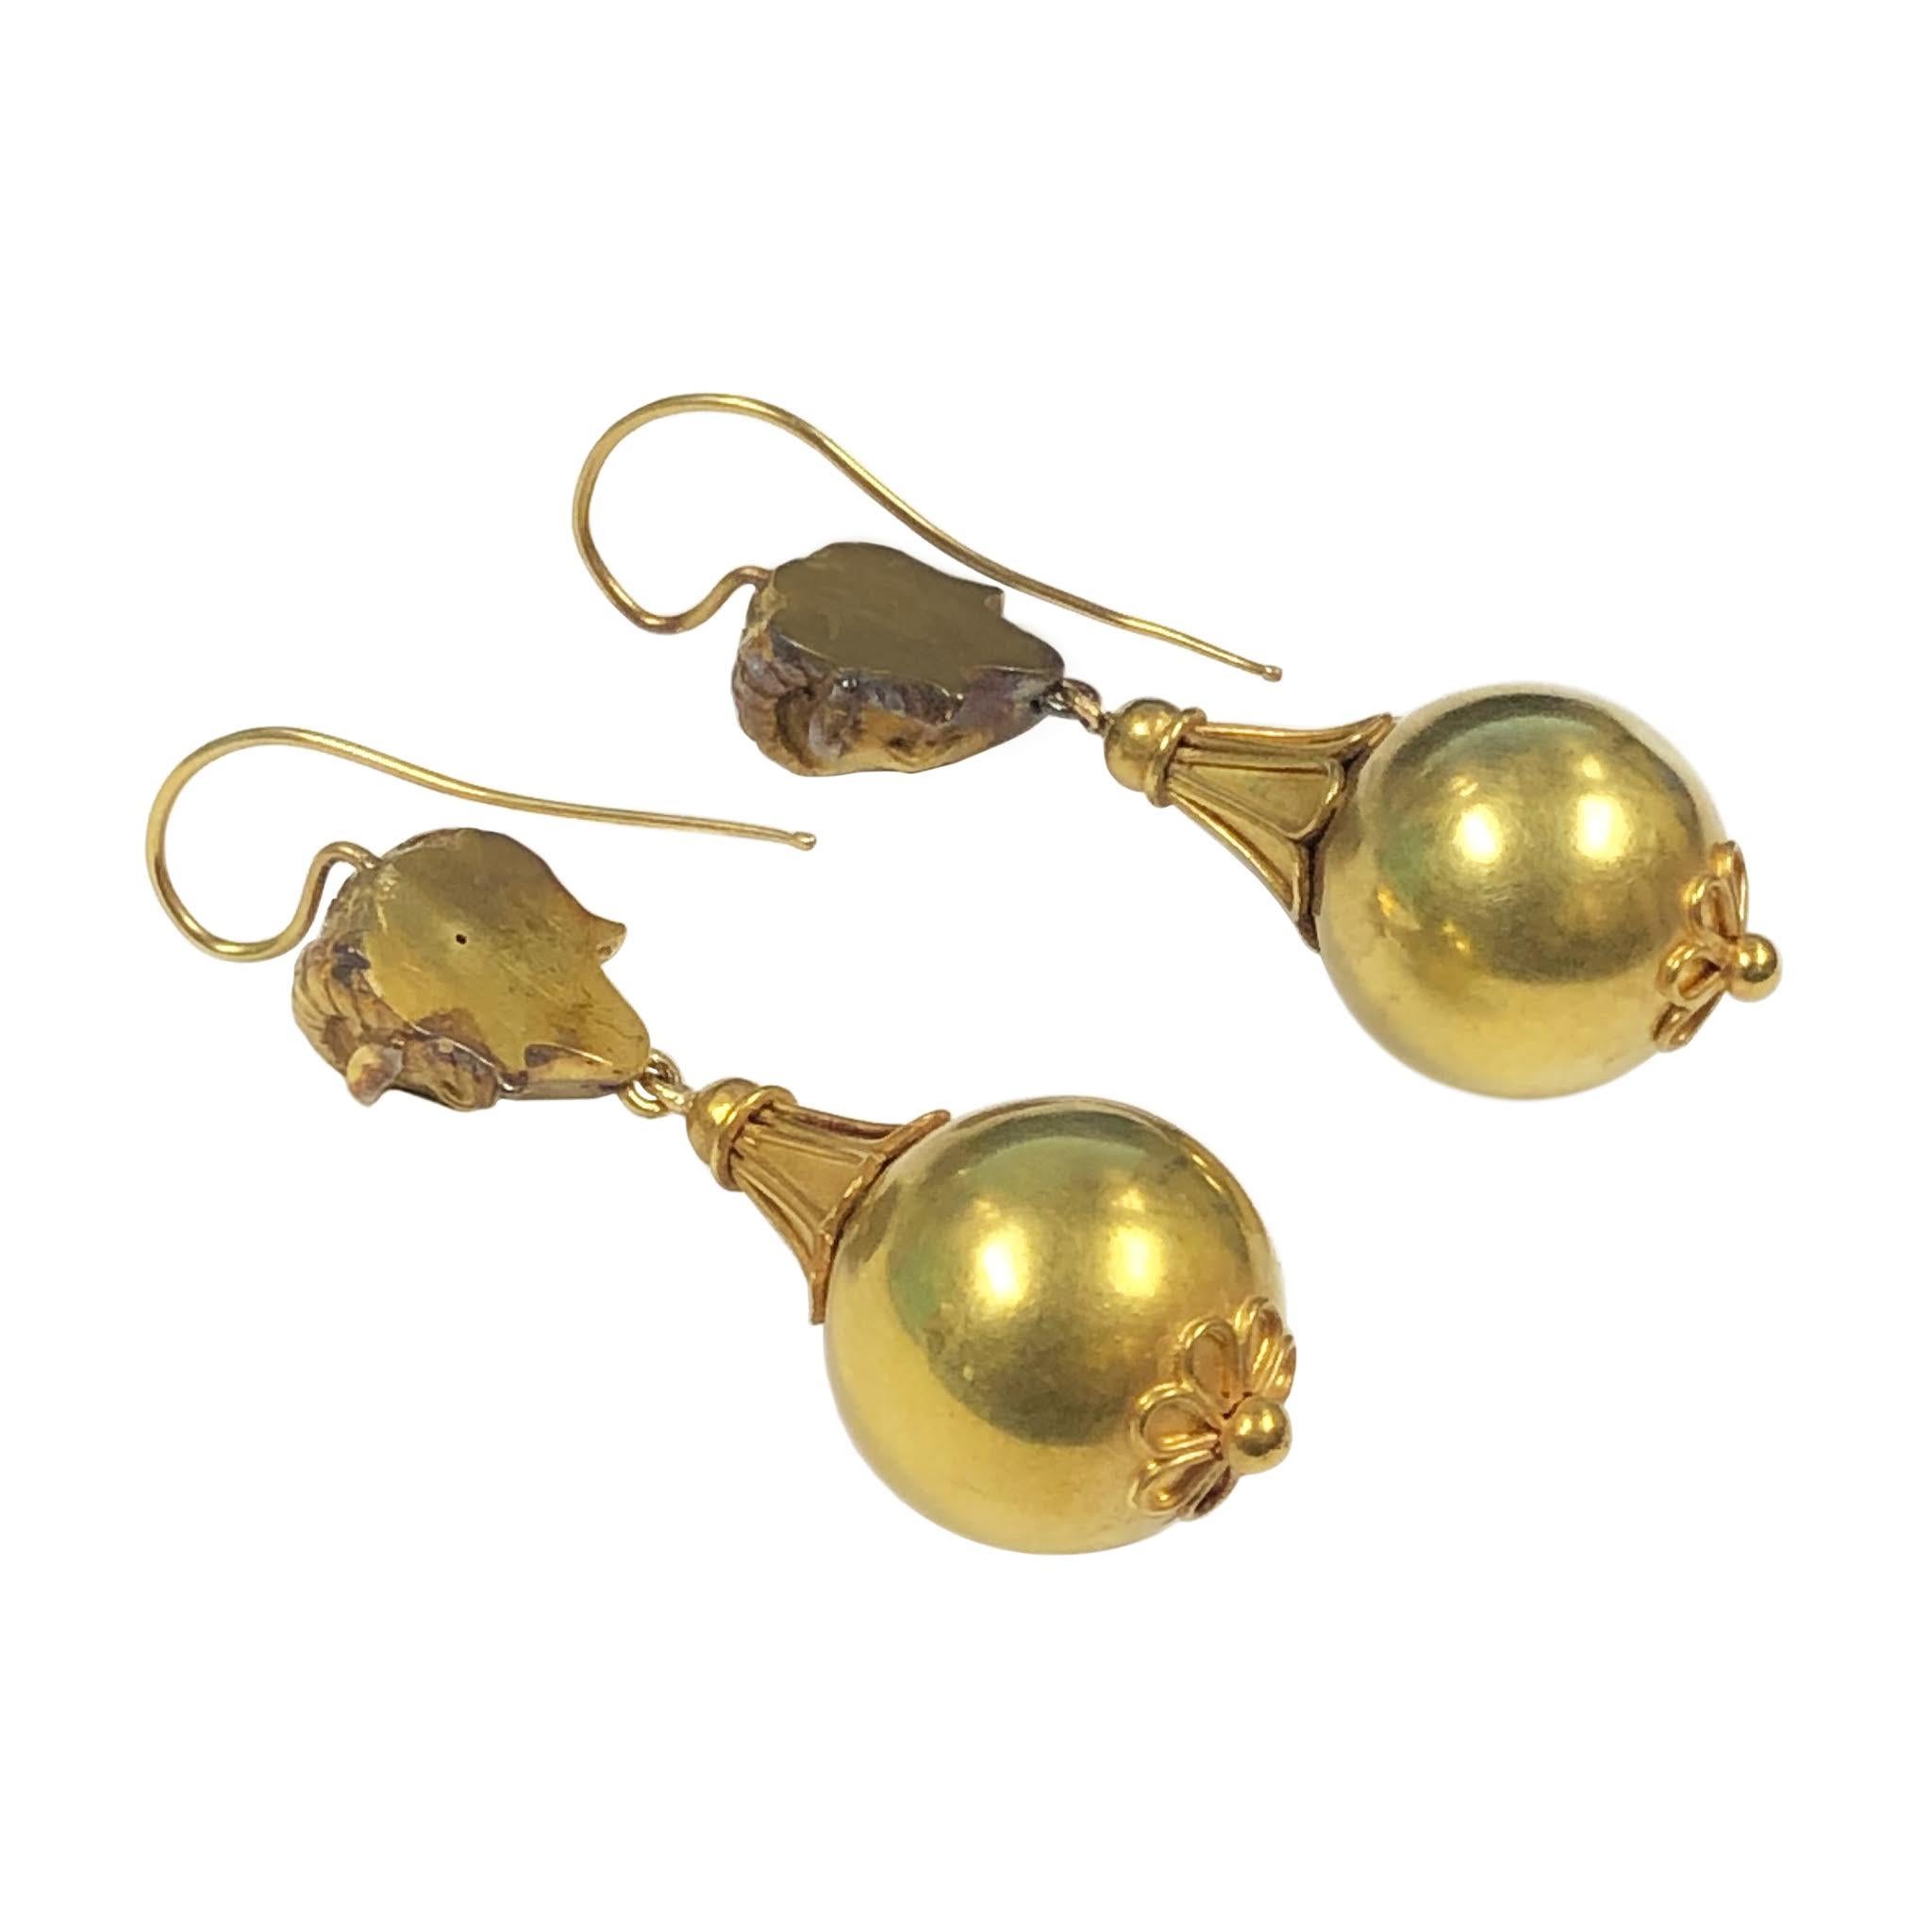 Circa 1880 Etruscan Revival Earrings, testing as 14k - 15k Gold, Large articulated and Impressive, measuring 2 1/8 inches in length with the bottom ball portion measuring 5/8 inch in diameter. The tops are a phenomenal well detailed Dimensional Rams